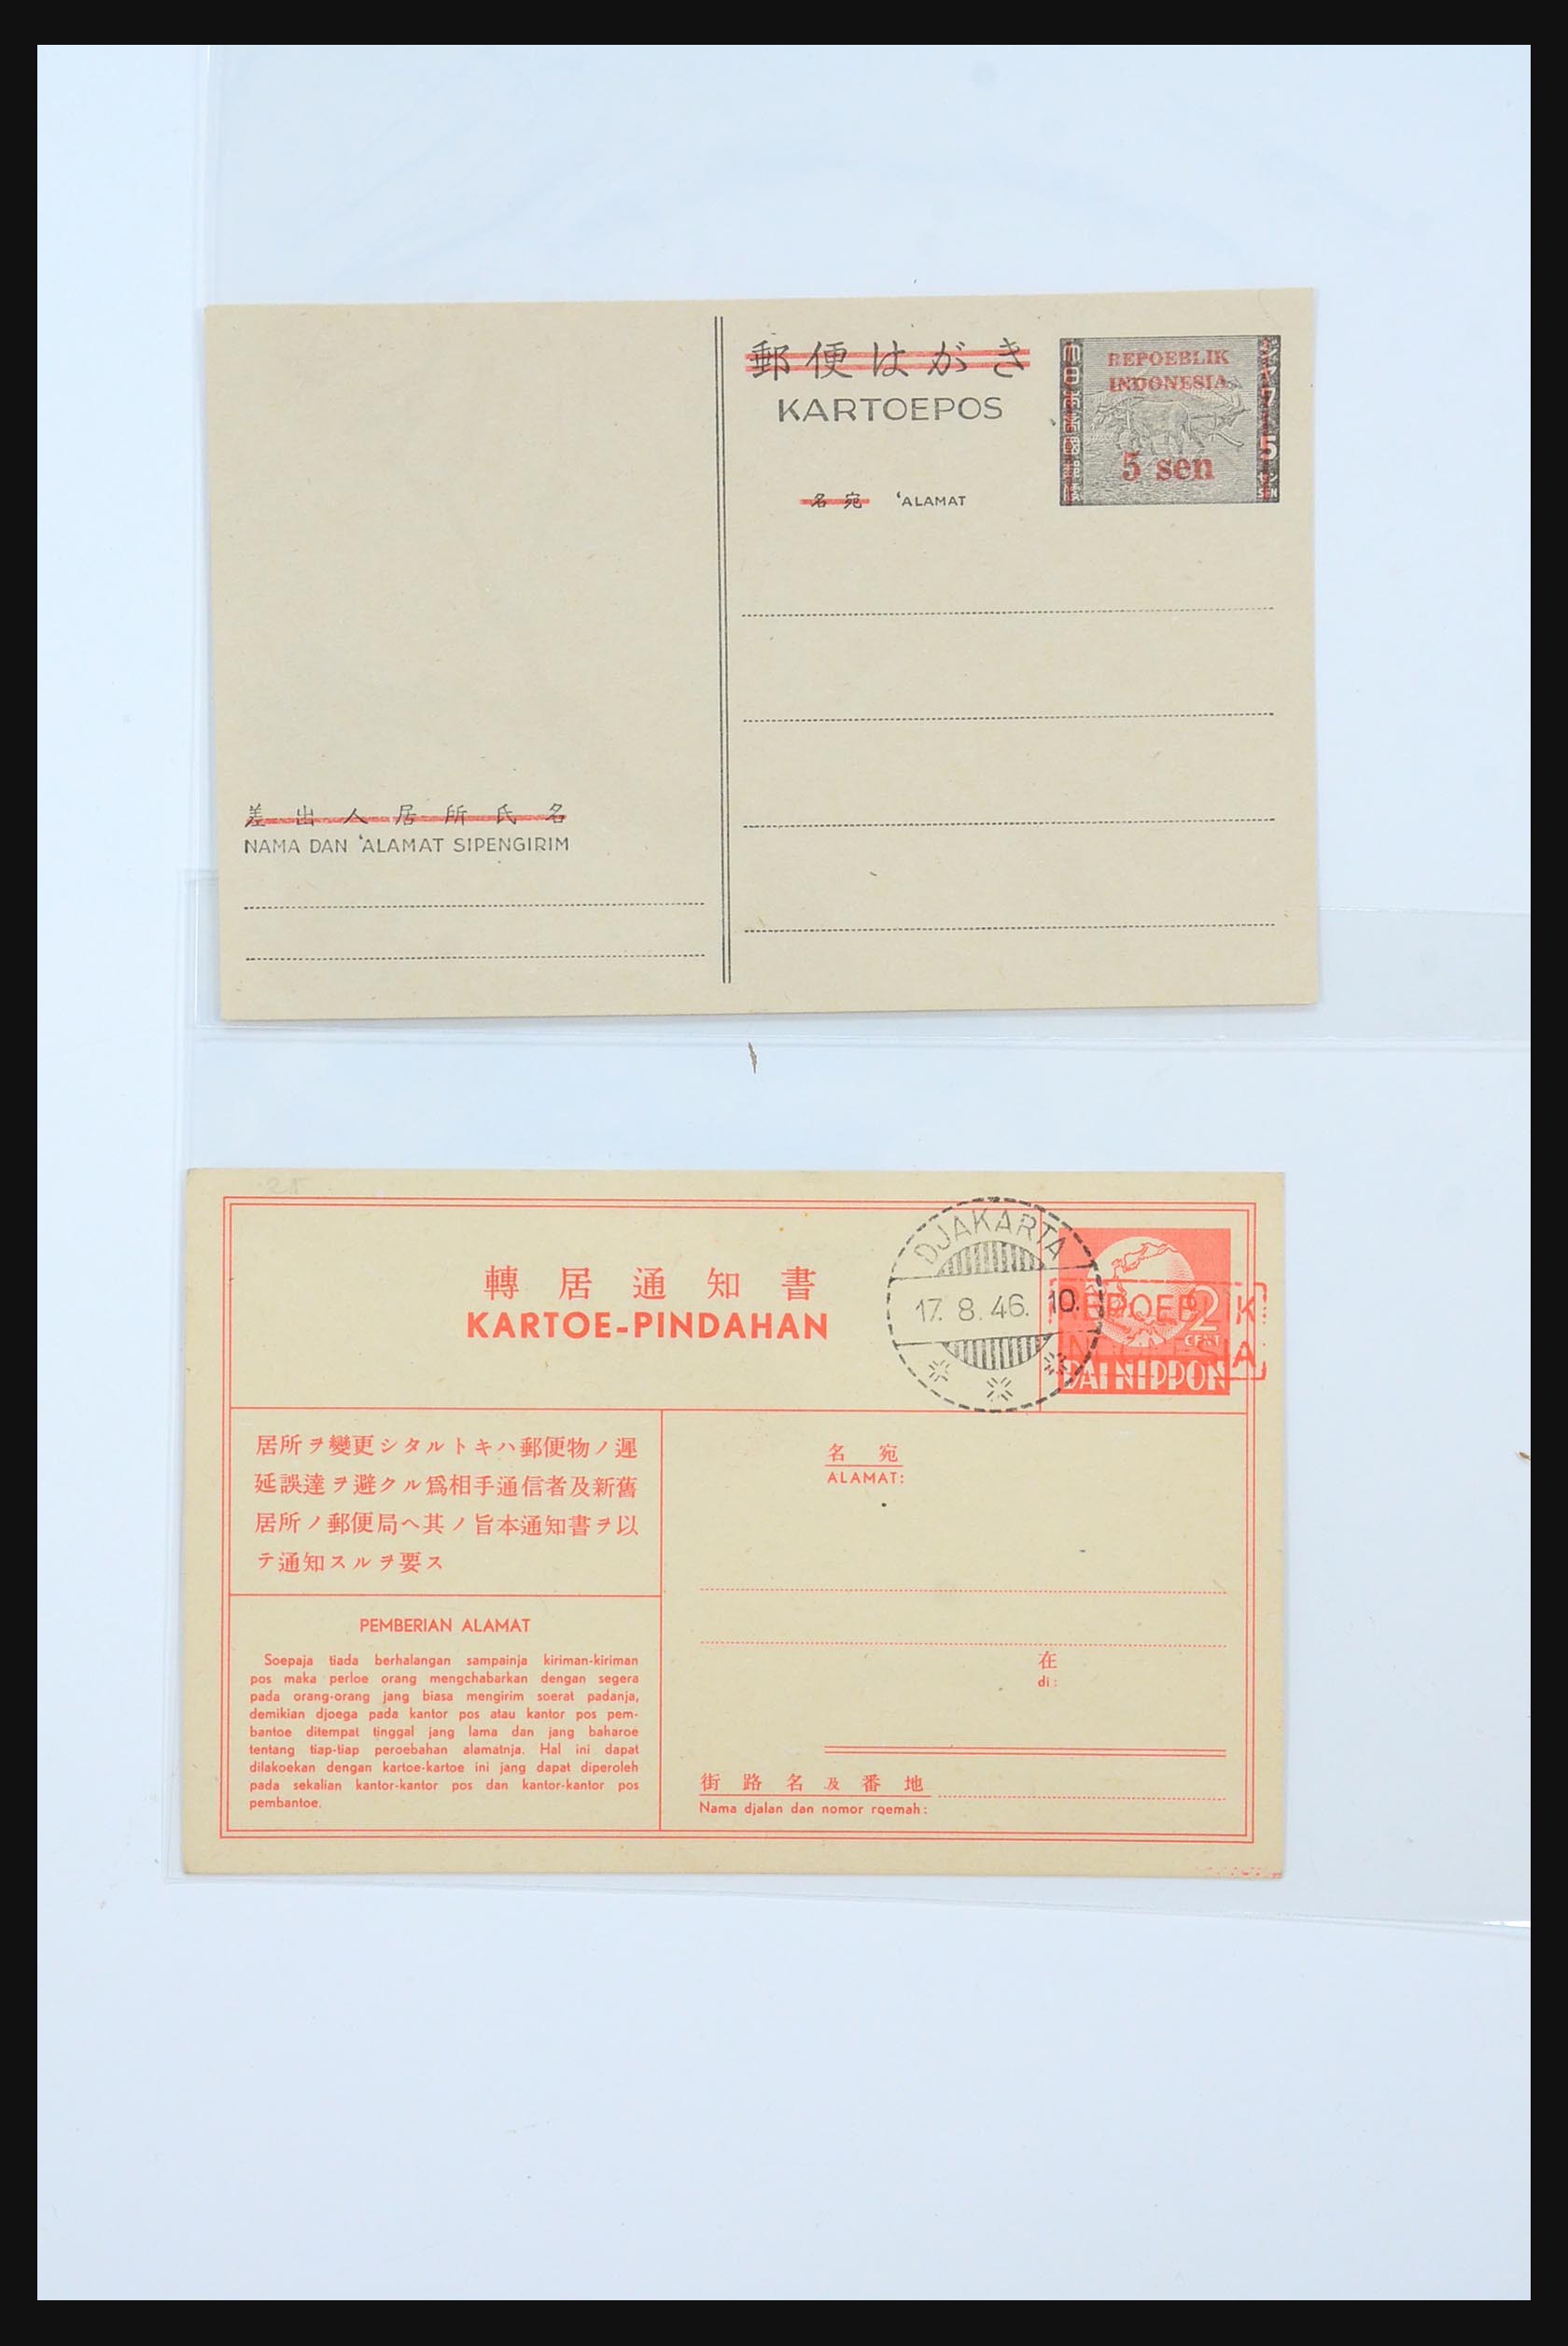 31362 015 - 31362 Netherlands Indies Japanese occupation covers 1942-1945.